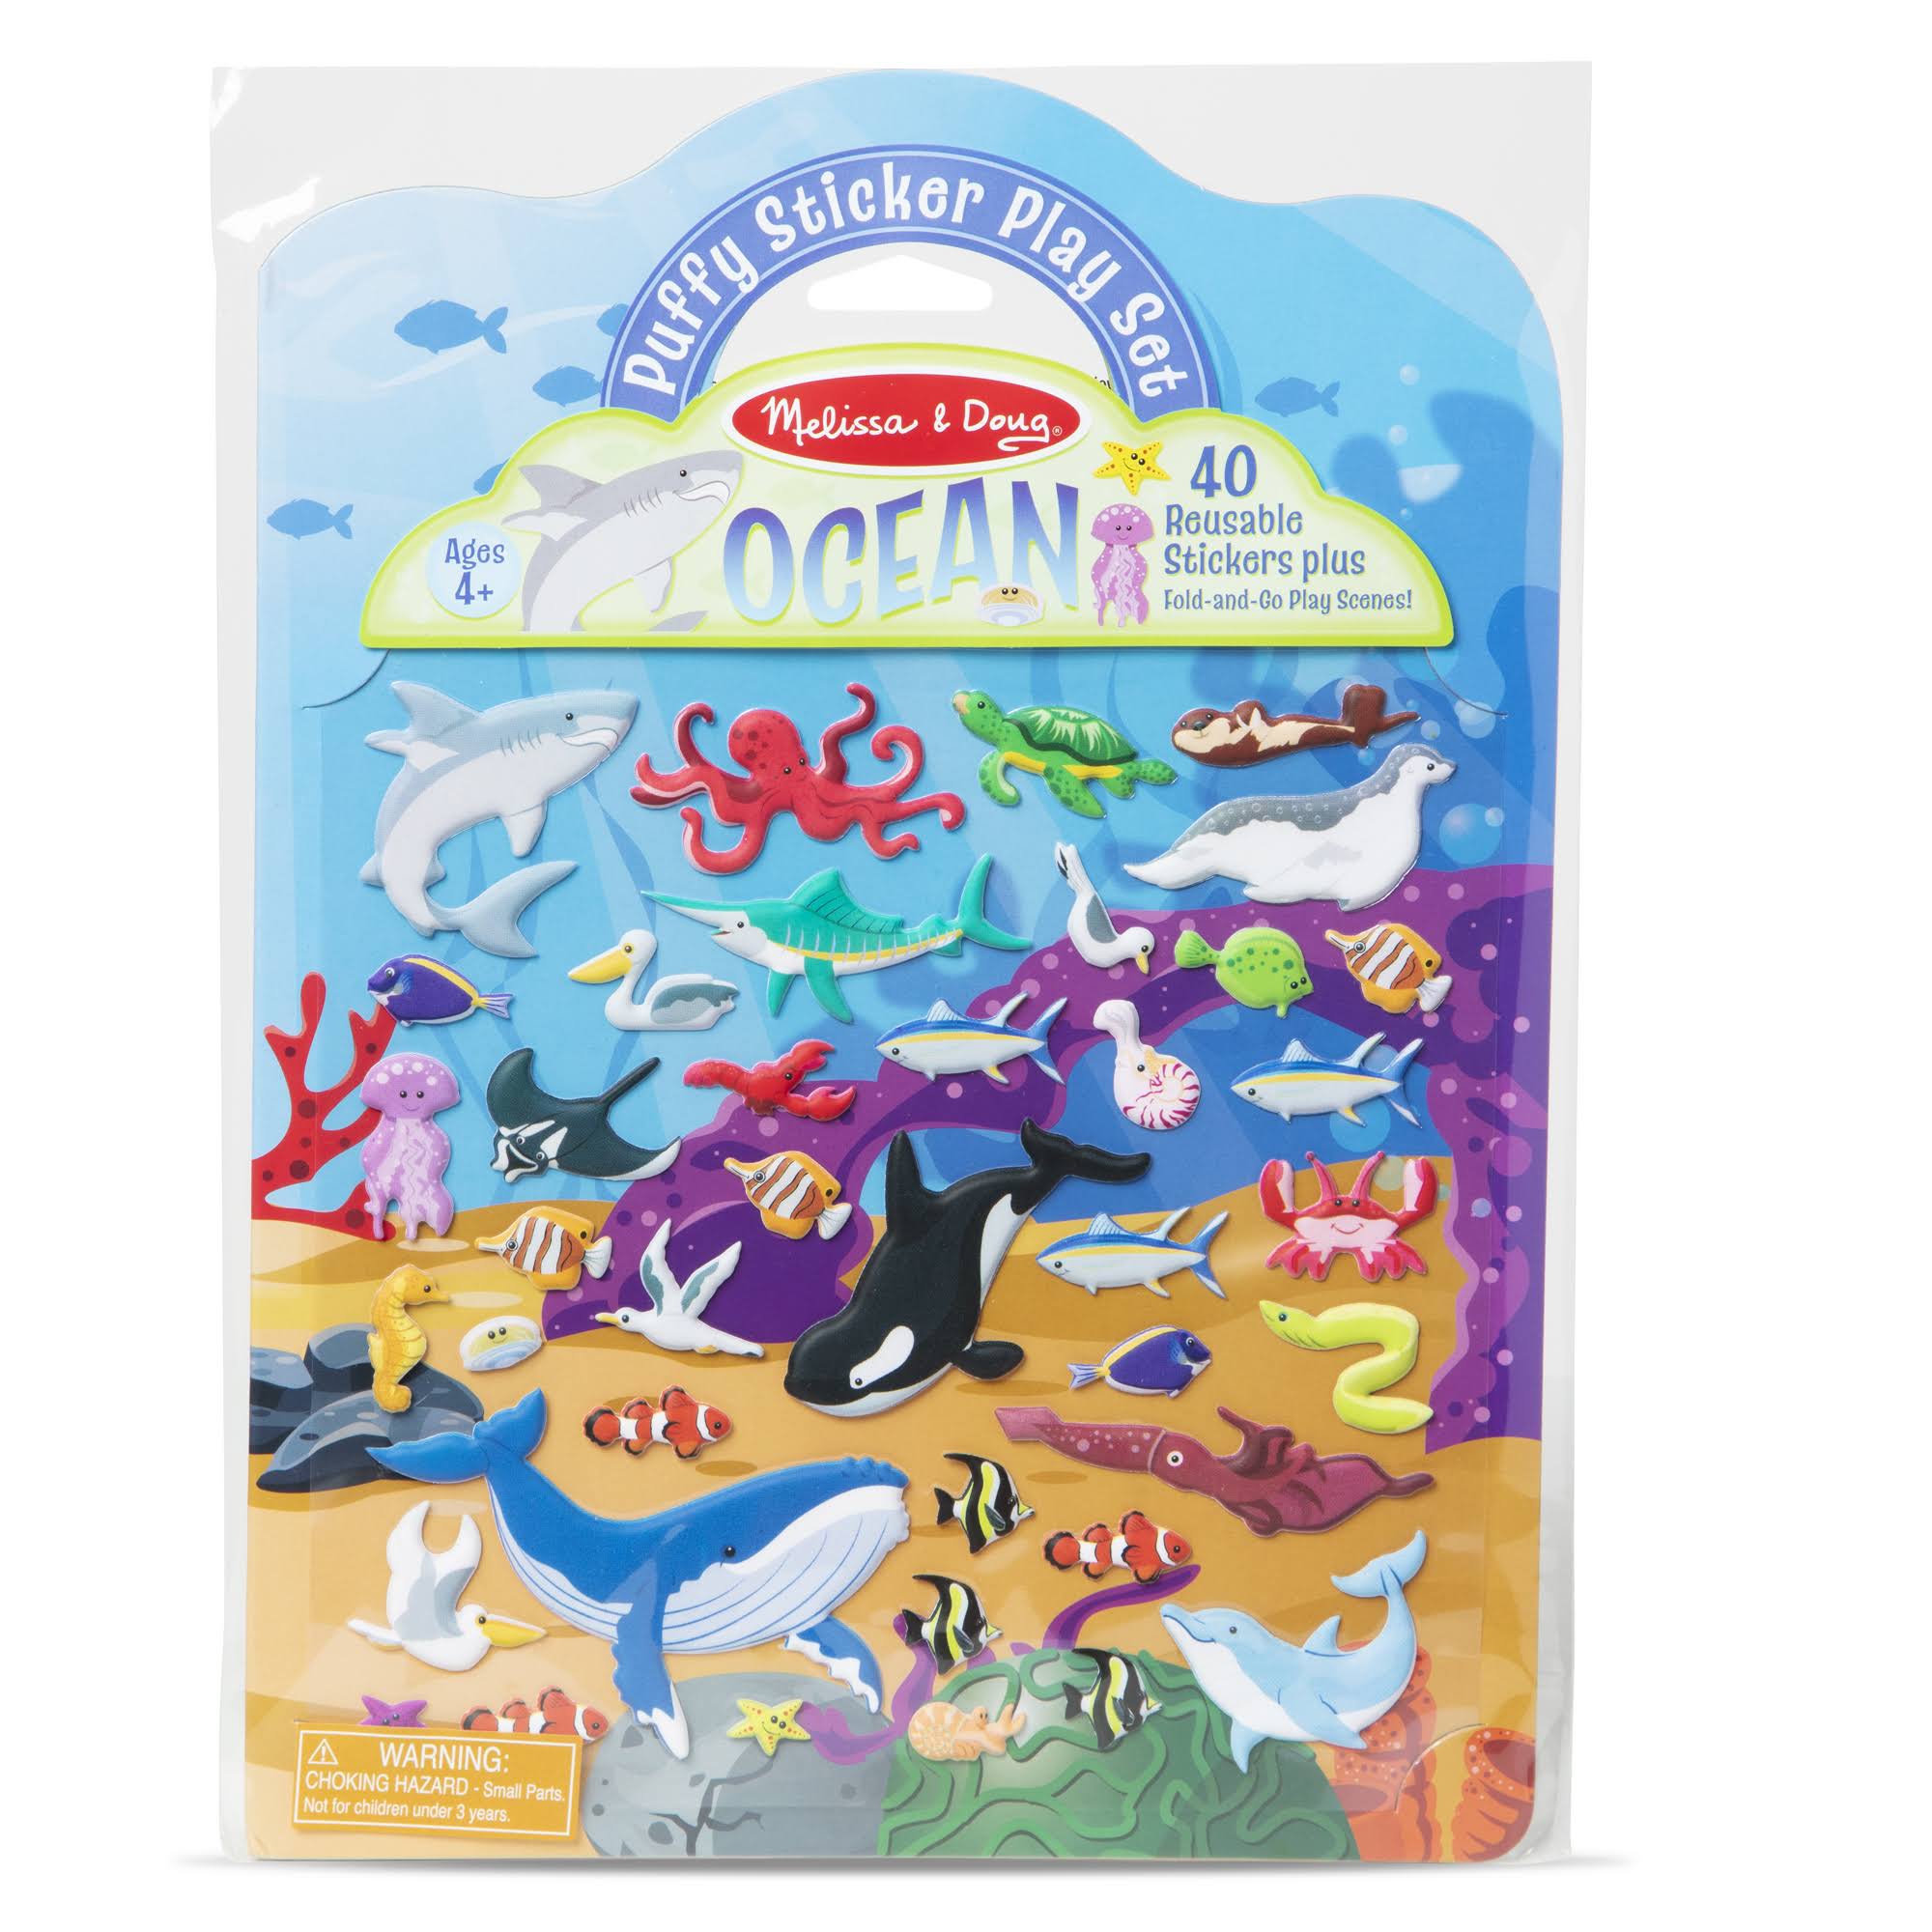 Melissa & Doug Ocean Puffy Sticker Play Set Travel Toy with Double-sid